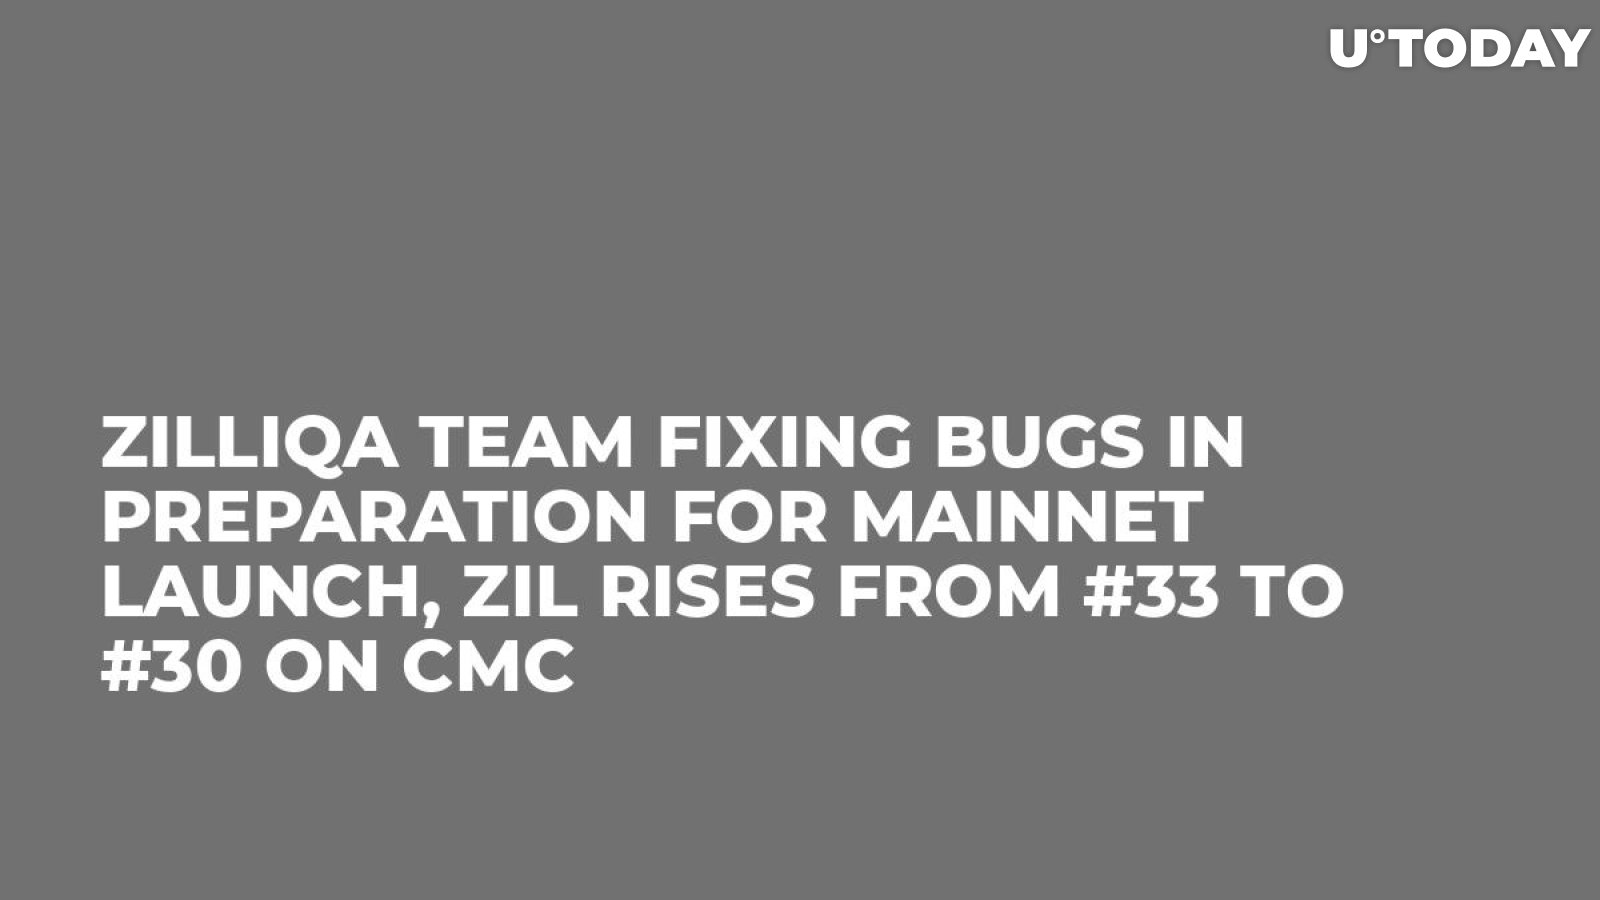 Zilliqa Team Fixing Bugs in Preparation for Mainnet Launch, ZIL Rises from #33 to #30 on CMC